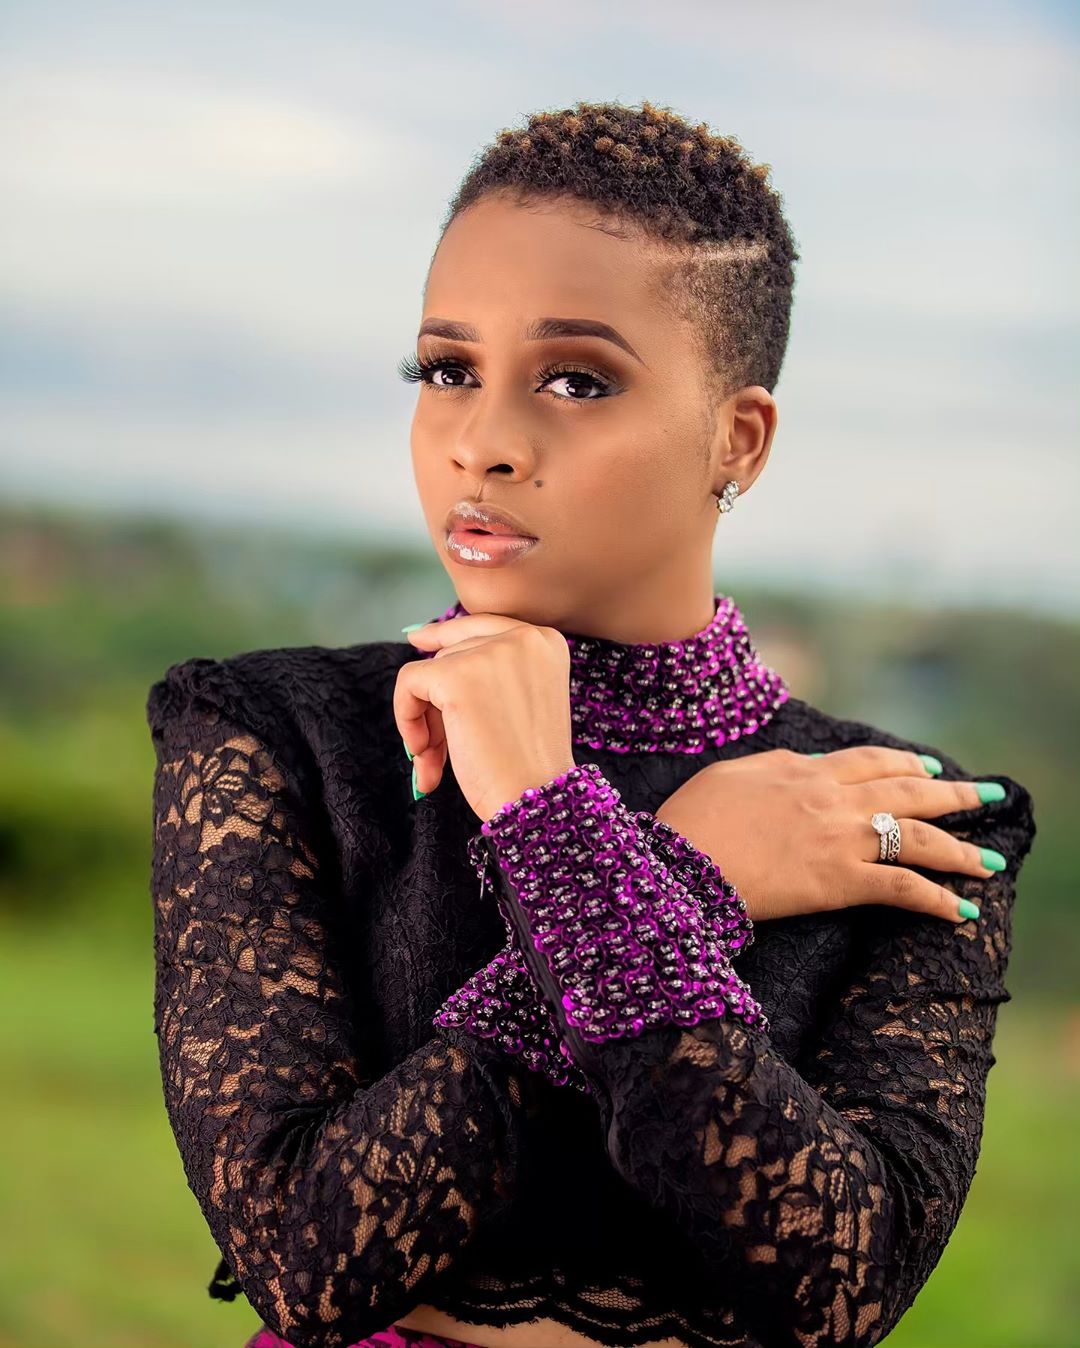 Tanzania´s Nandy reveals more about the tycoon who picked her up at the airport during her album launch